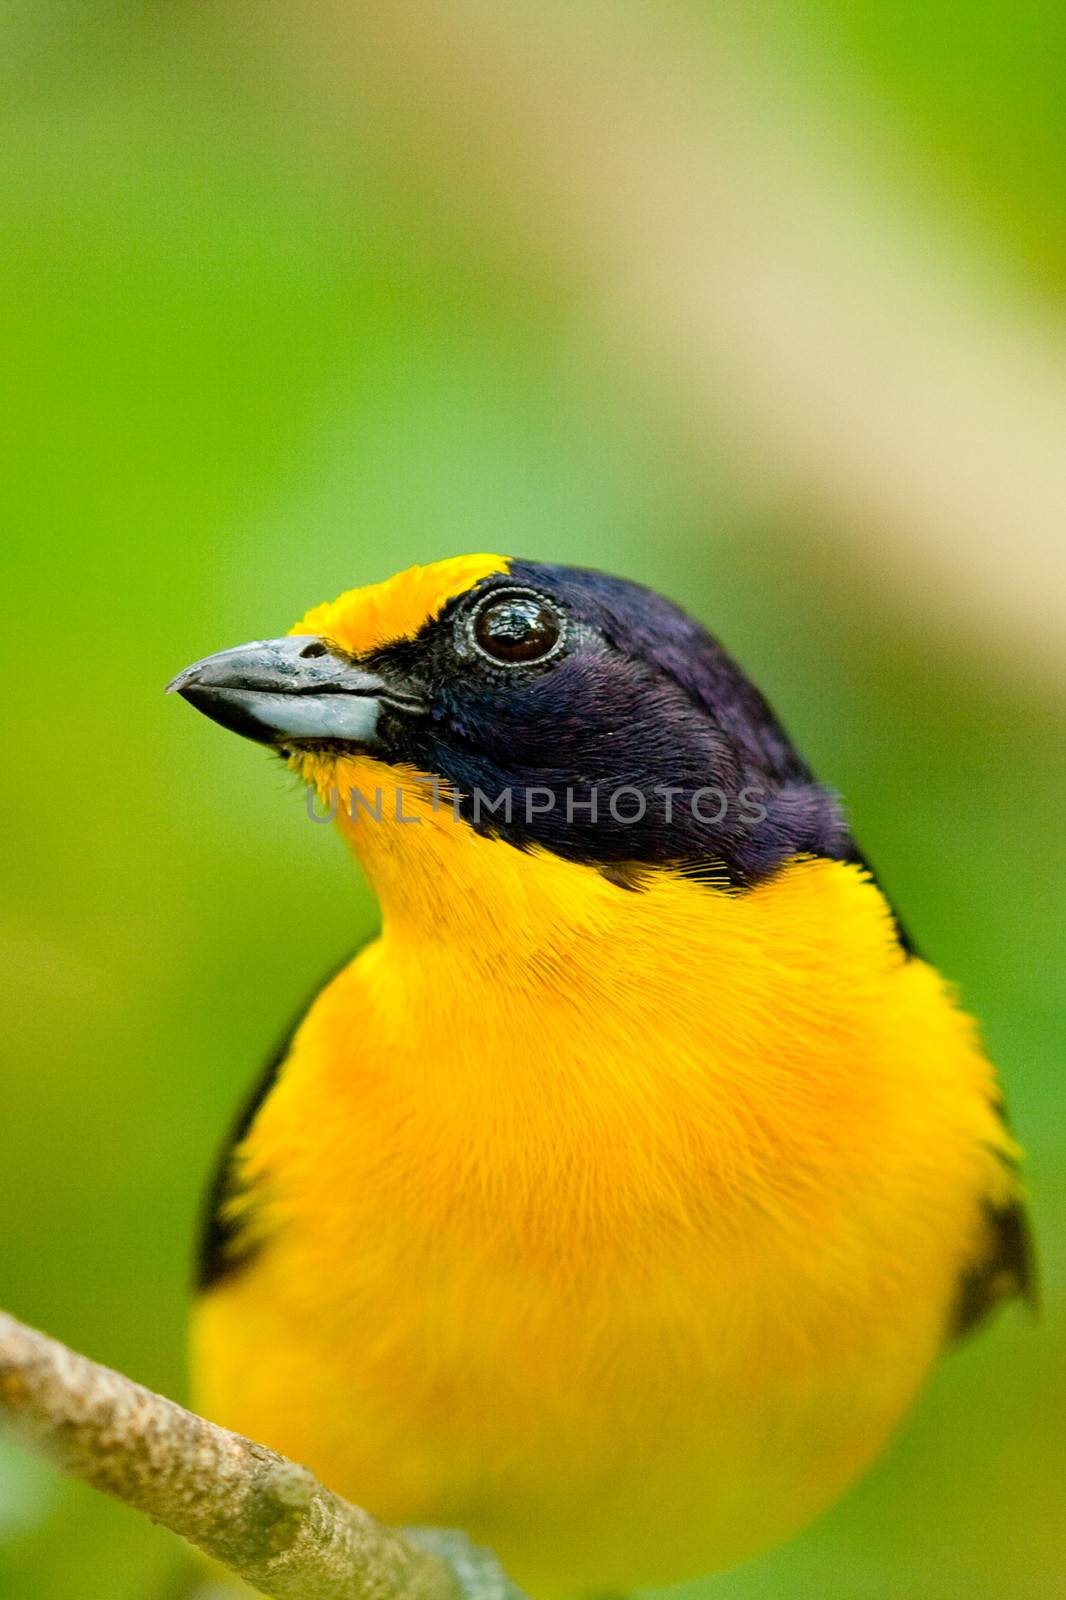 Portrait of bird with yellow and blue feathers, green nature background.